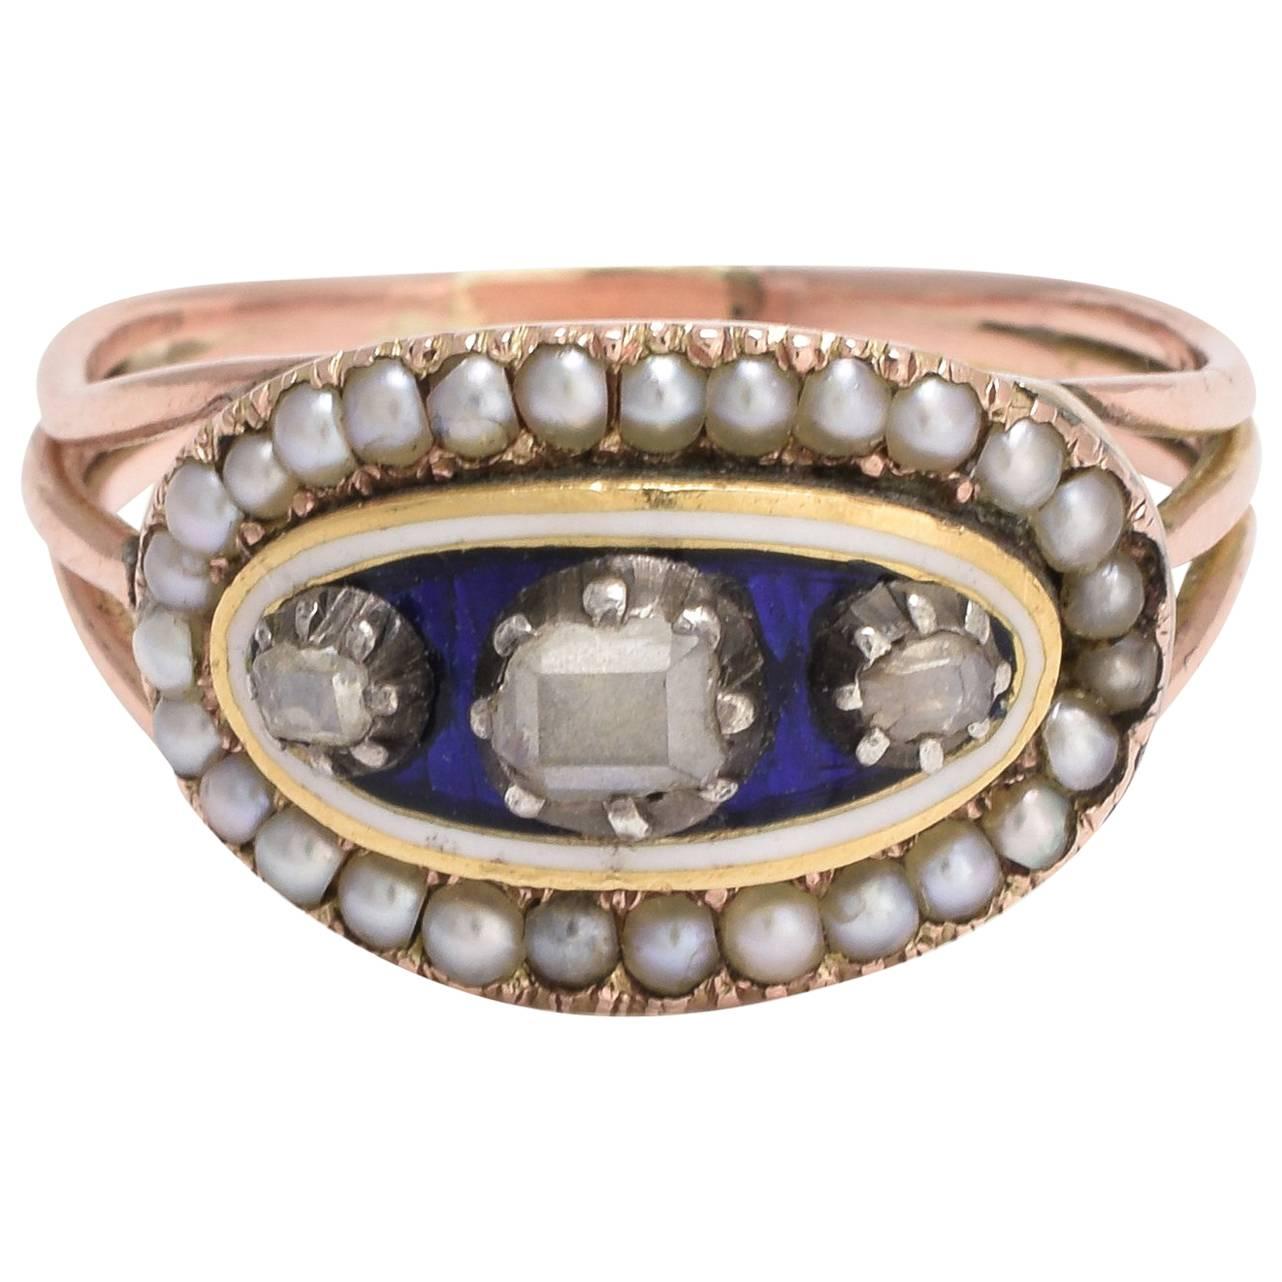 Georgian Blue Enamel and Table Cut Diamond Ring with Seed Pearl Border